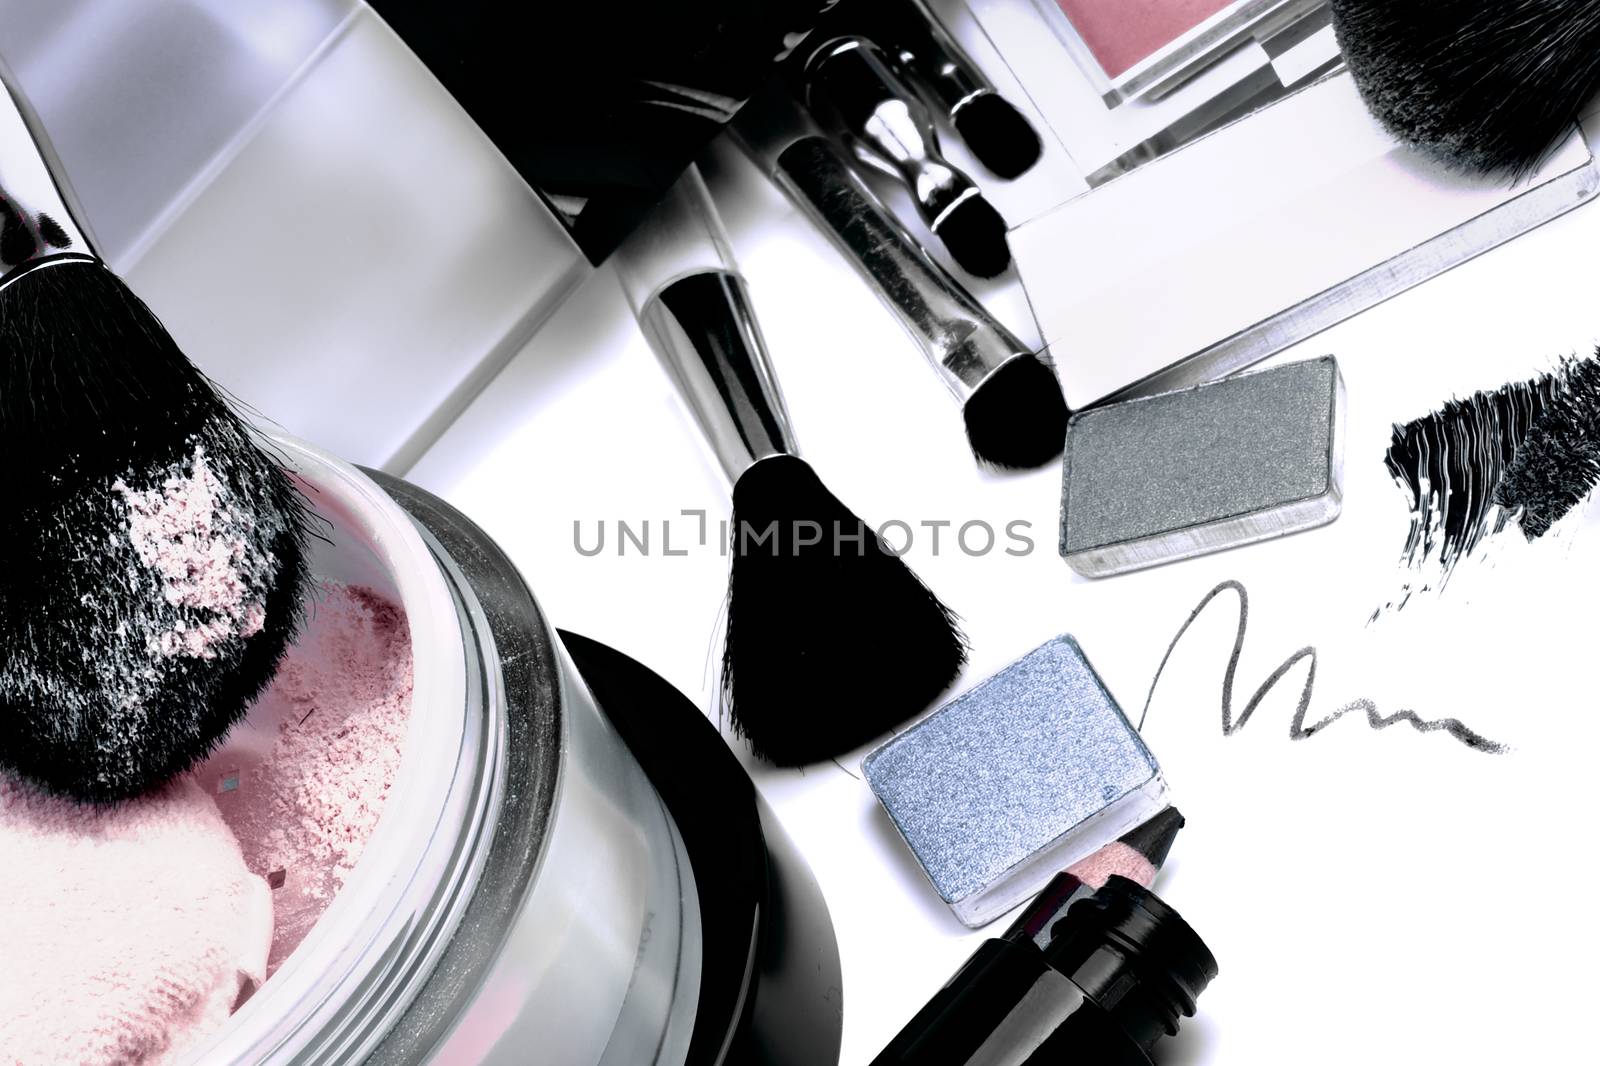 Arrangement of Make up Products with Eyeshadow, Moisturizer, Mascara, Blush, Face Powder and Personal Accessory closeup on White background